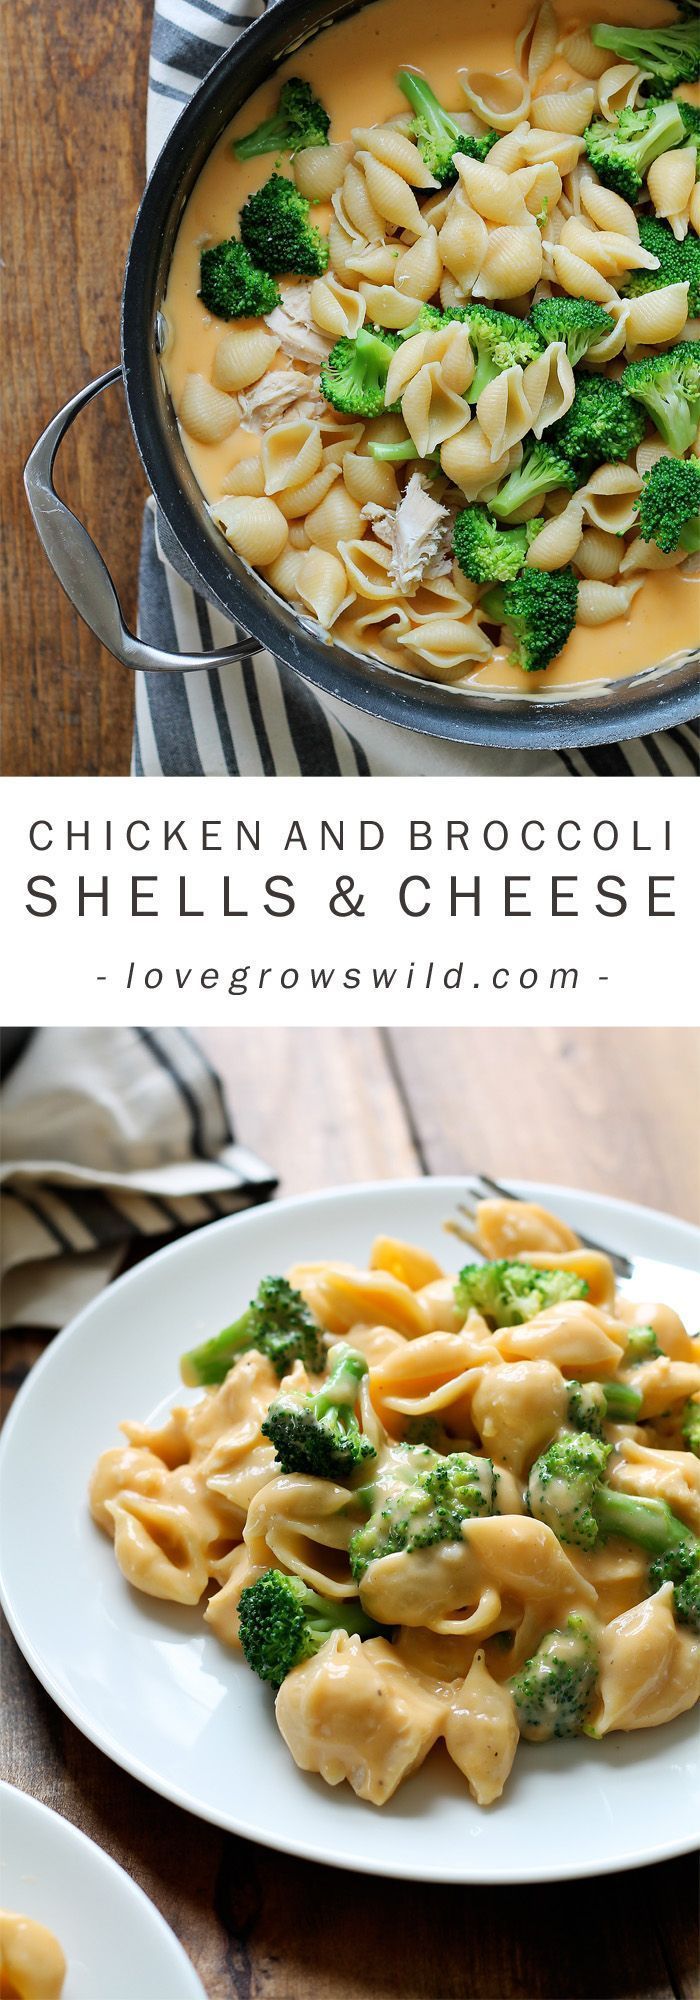 Perfectly creamy homemade shells and cheese made with chicken and broccoli. Everyone loves this easy weeknight meal!